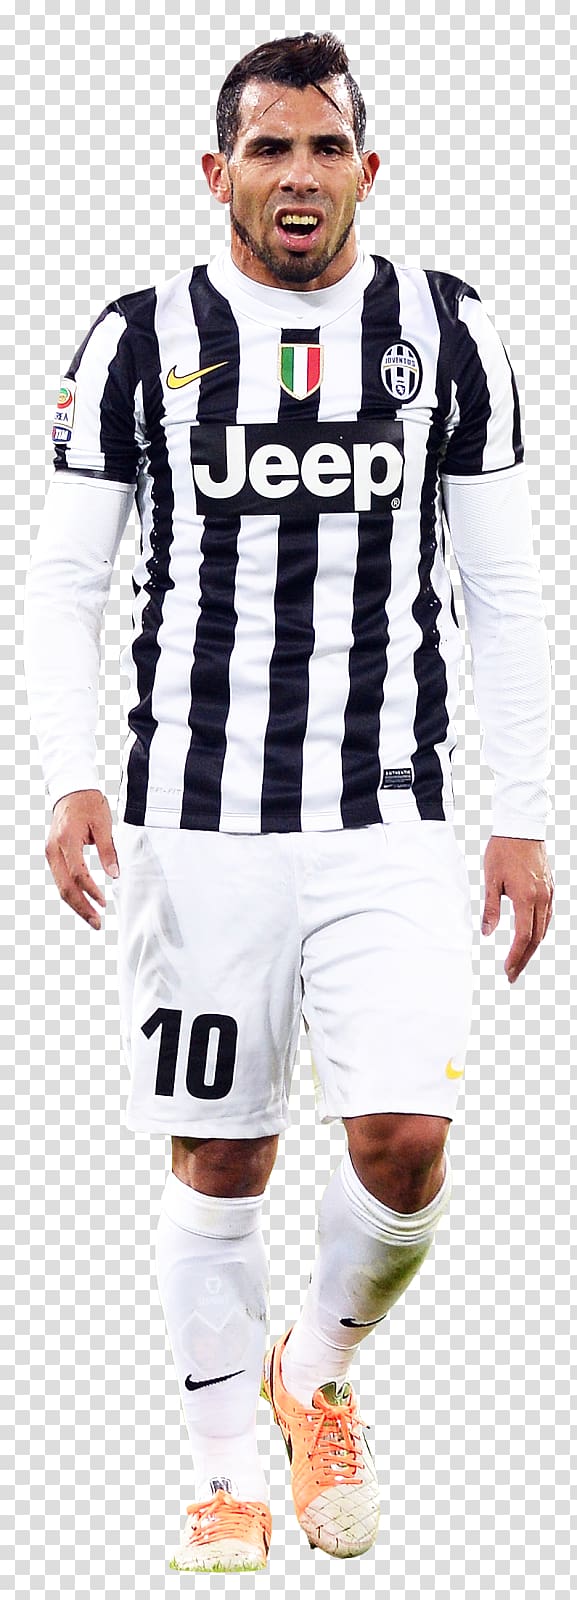 Andrea Pirlo Jersey Juventus F.C. Football Sport, football transparent background PNG clipart